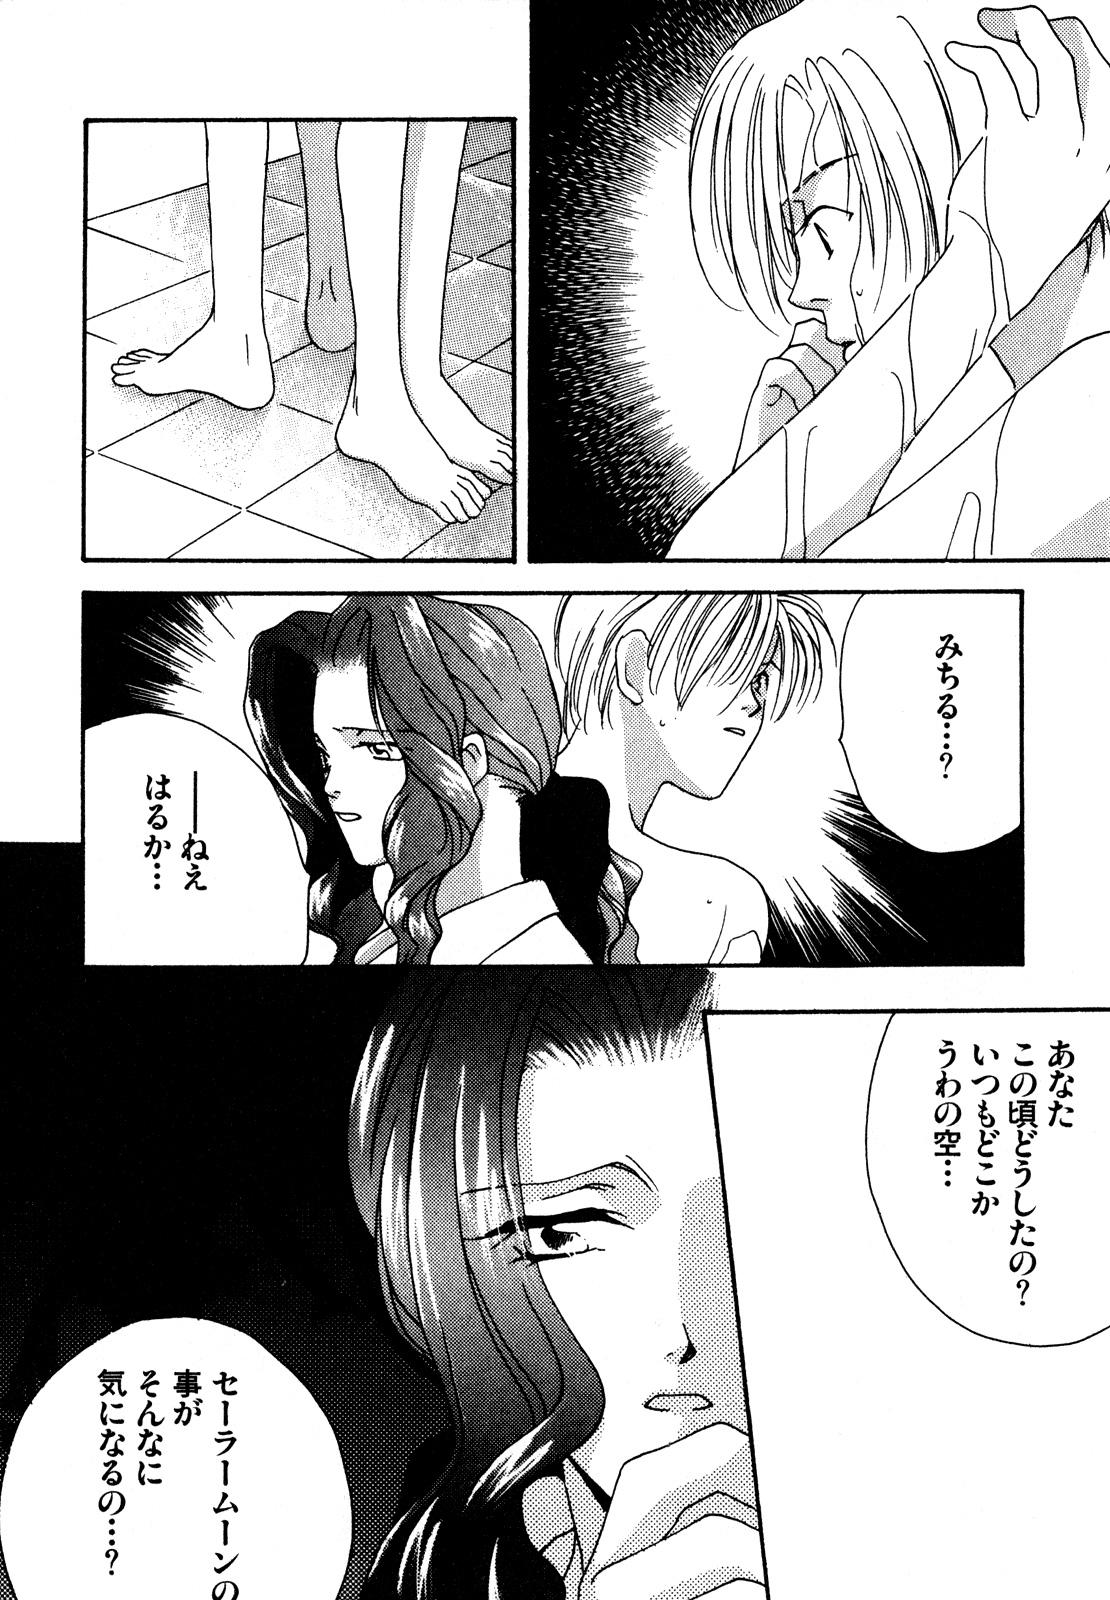 Love Lunatic Party 7 - Sailor moon Famosa - Page 11